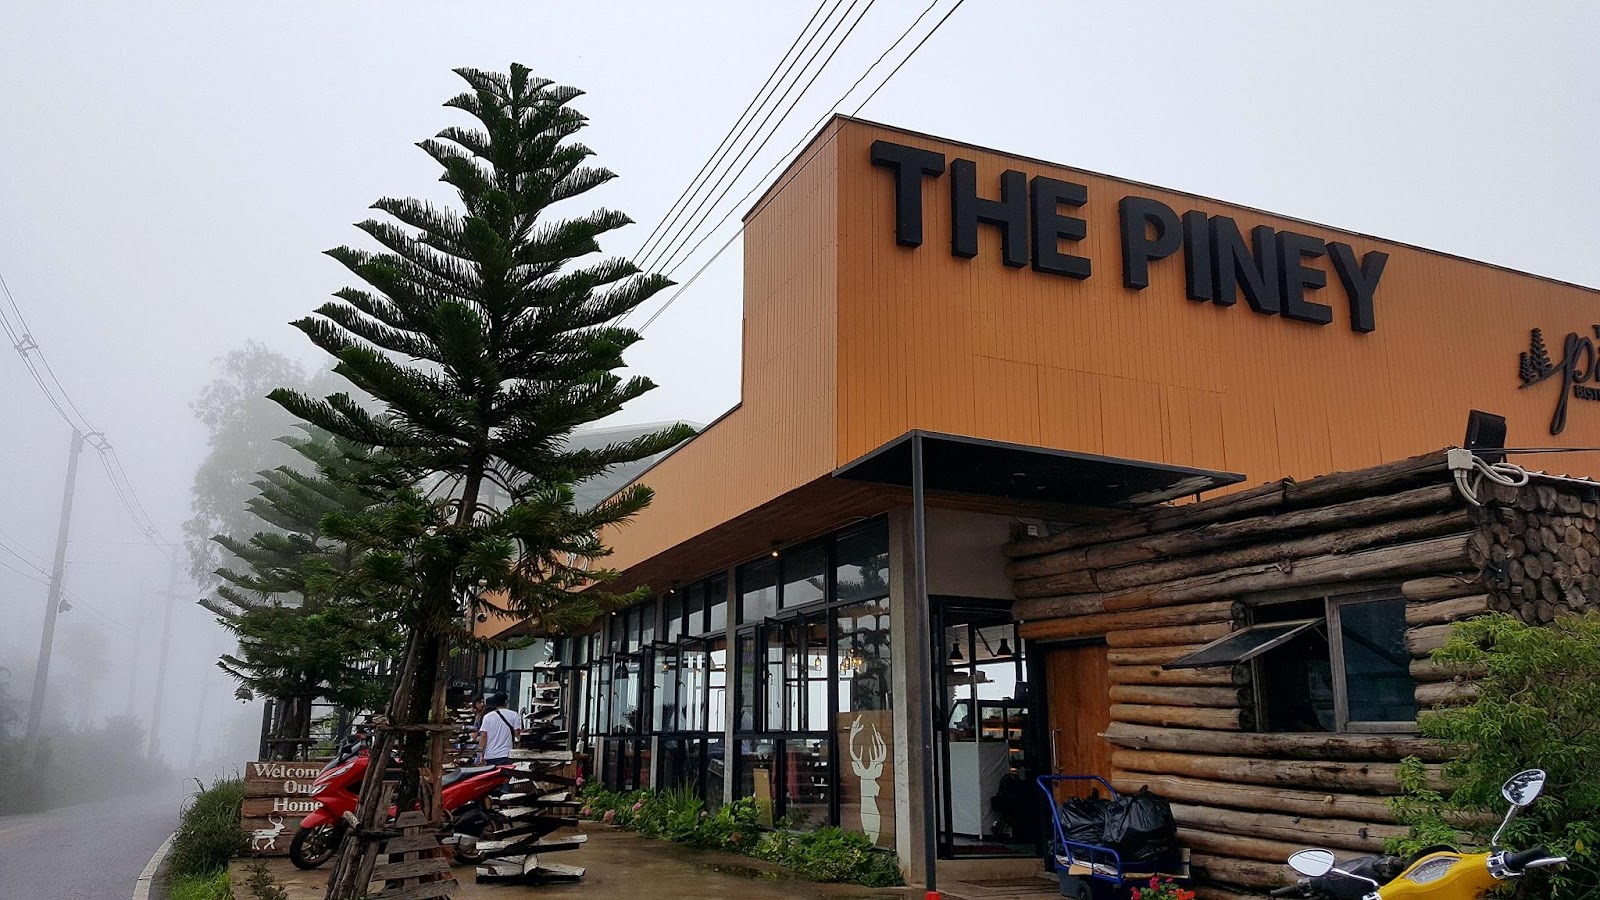 3. The Piney Bistro Cafe